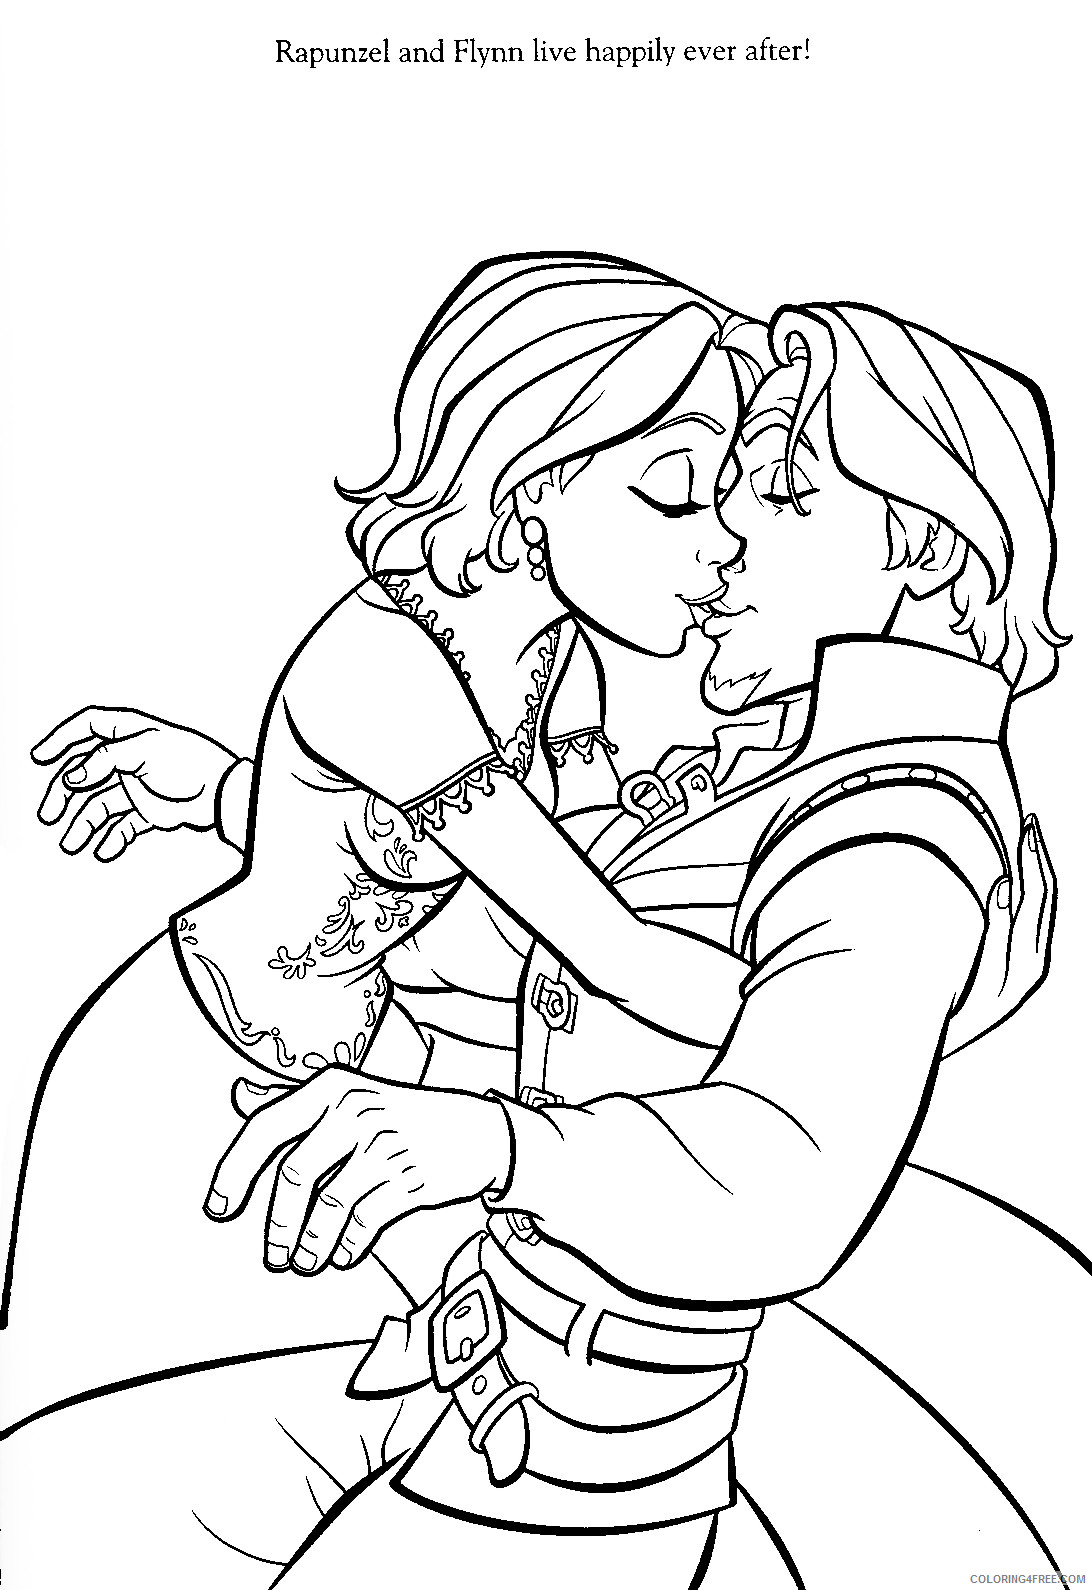 Rapunzel Coloring Pages Cartoons Tangled Rapunzel 2 Printable 2020 5345 Coloring4free